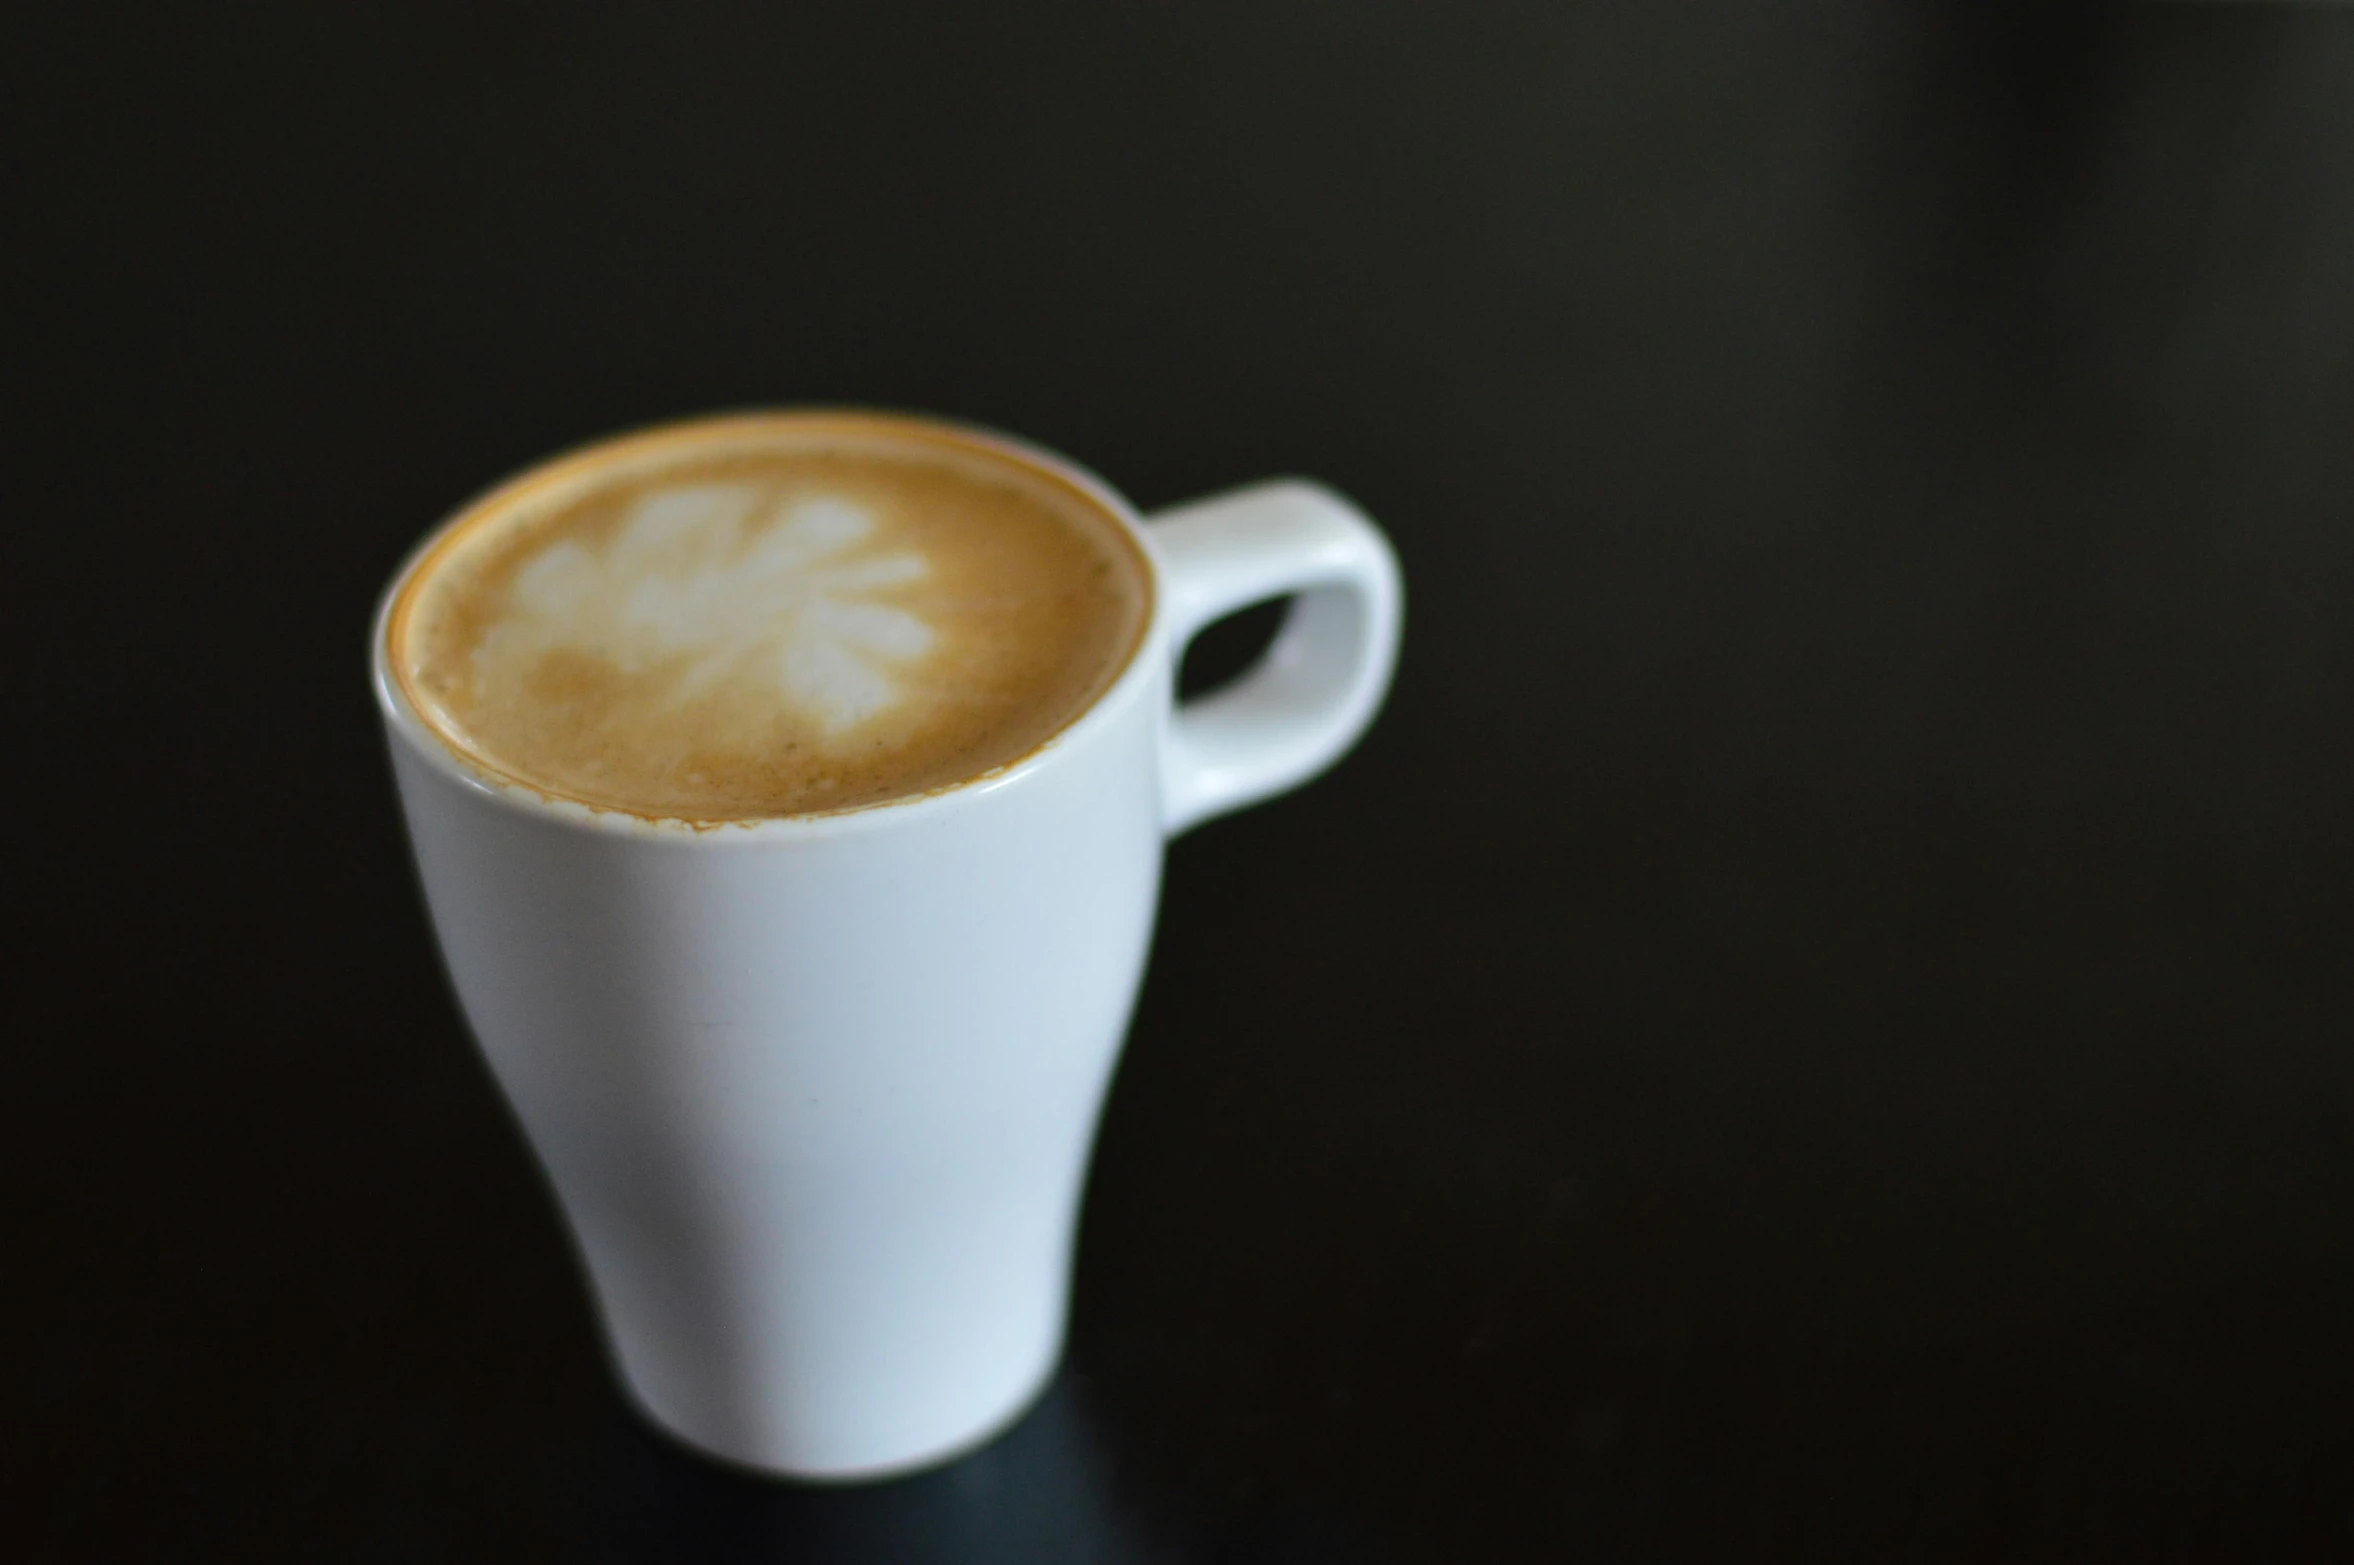 a close up of a cup of coffee on a table, paul barson, very pale, thumbnail, fan favorite